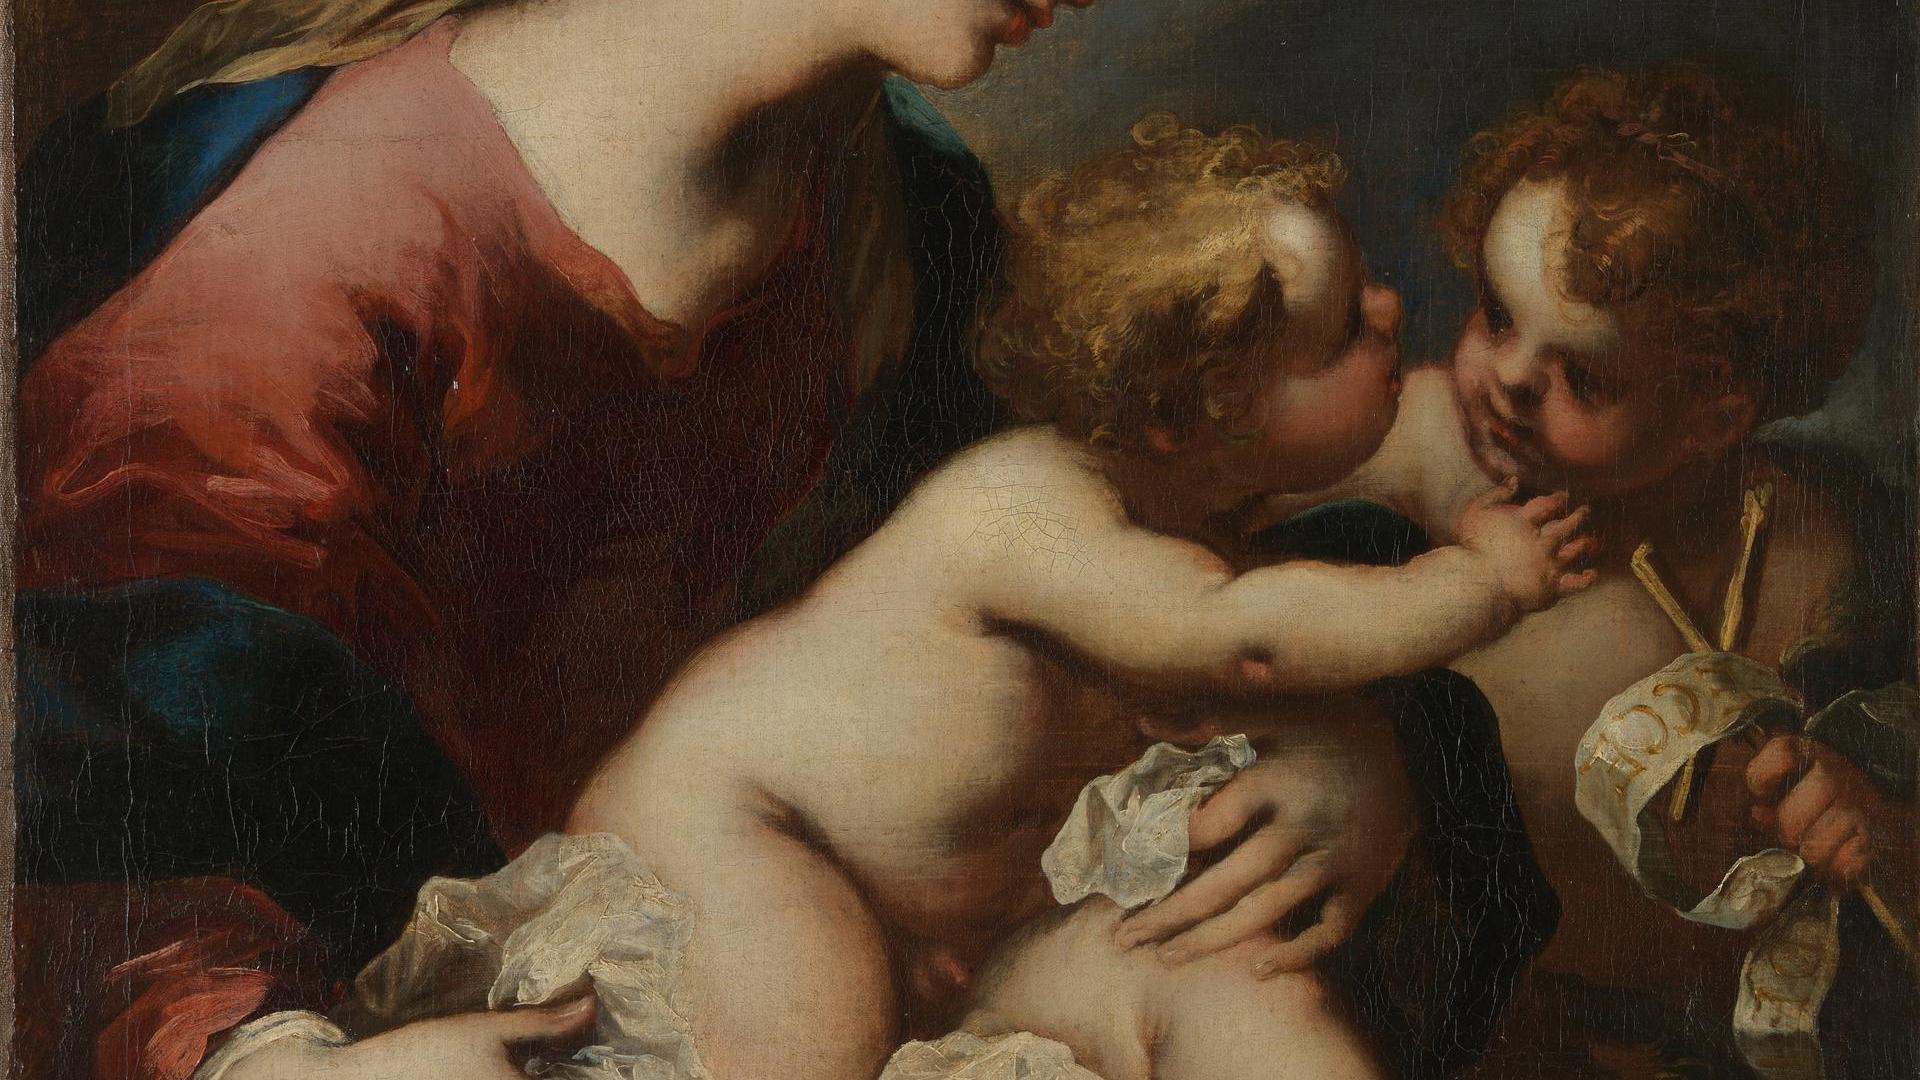 The Virgin and Child with Saint John the Baptist by Valerio Castello